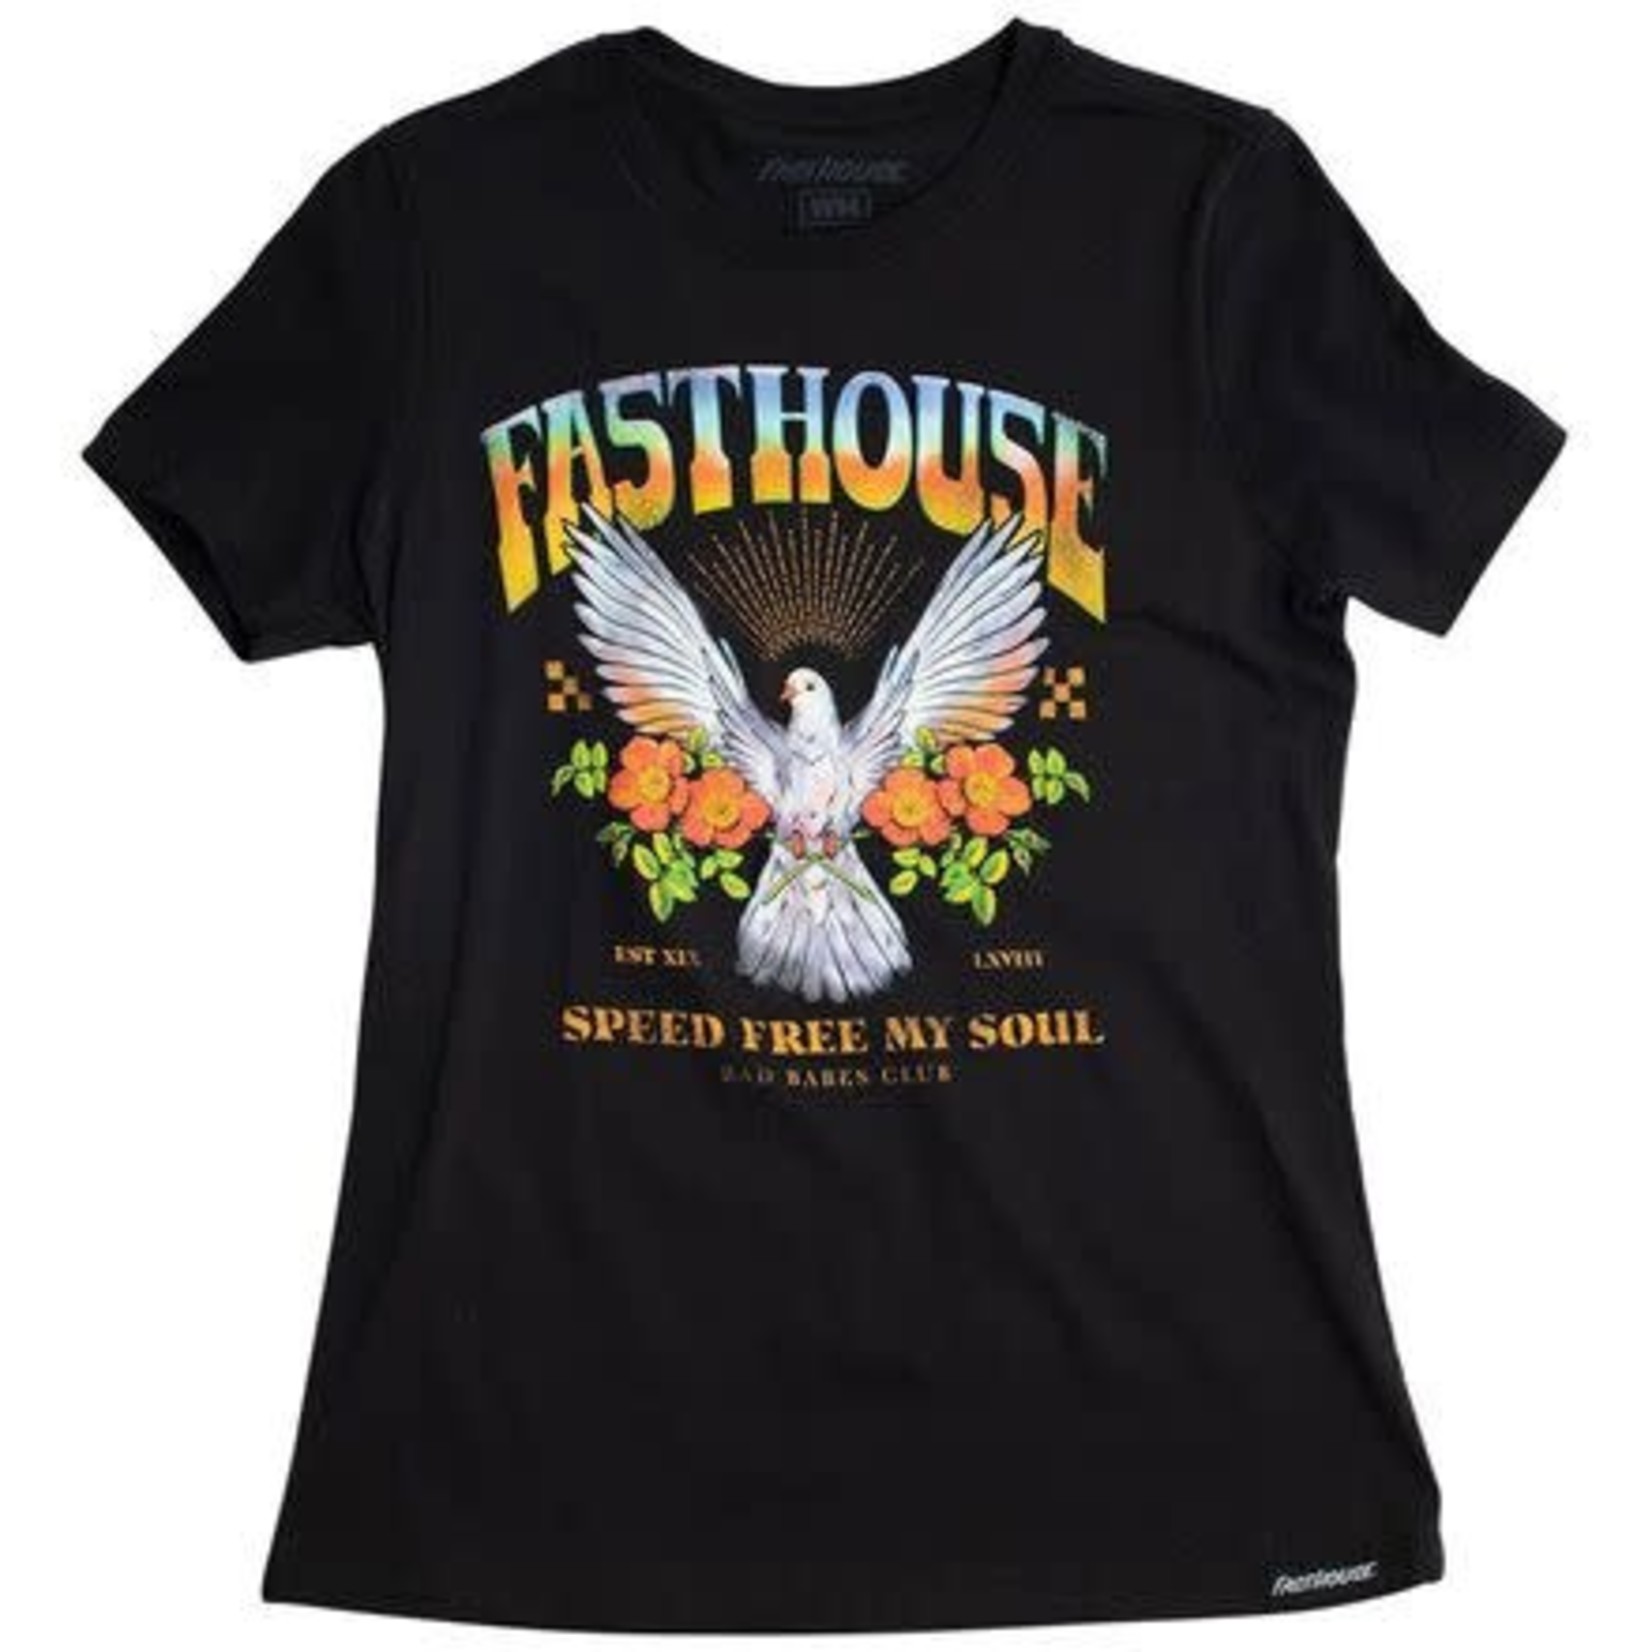 FASTHOUSE Youth Girl's Dove Tee, Black Heather